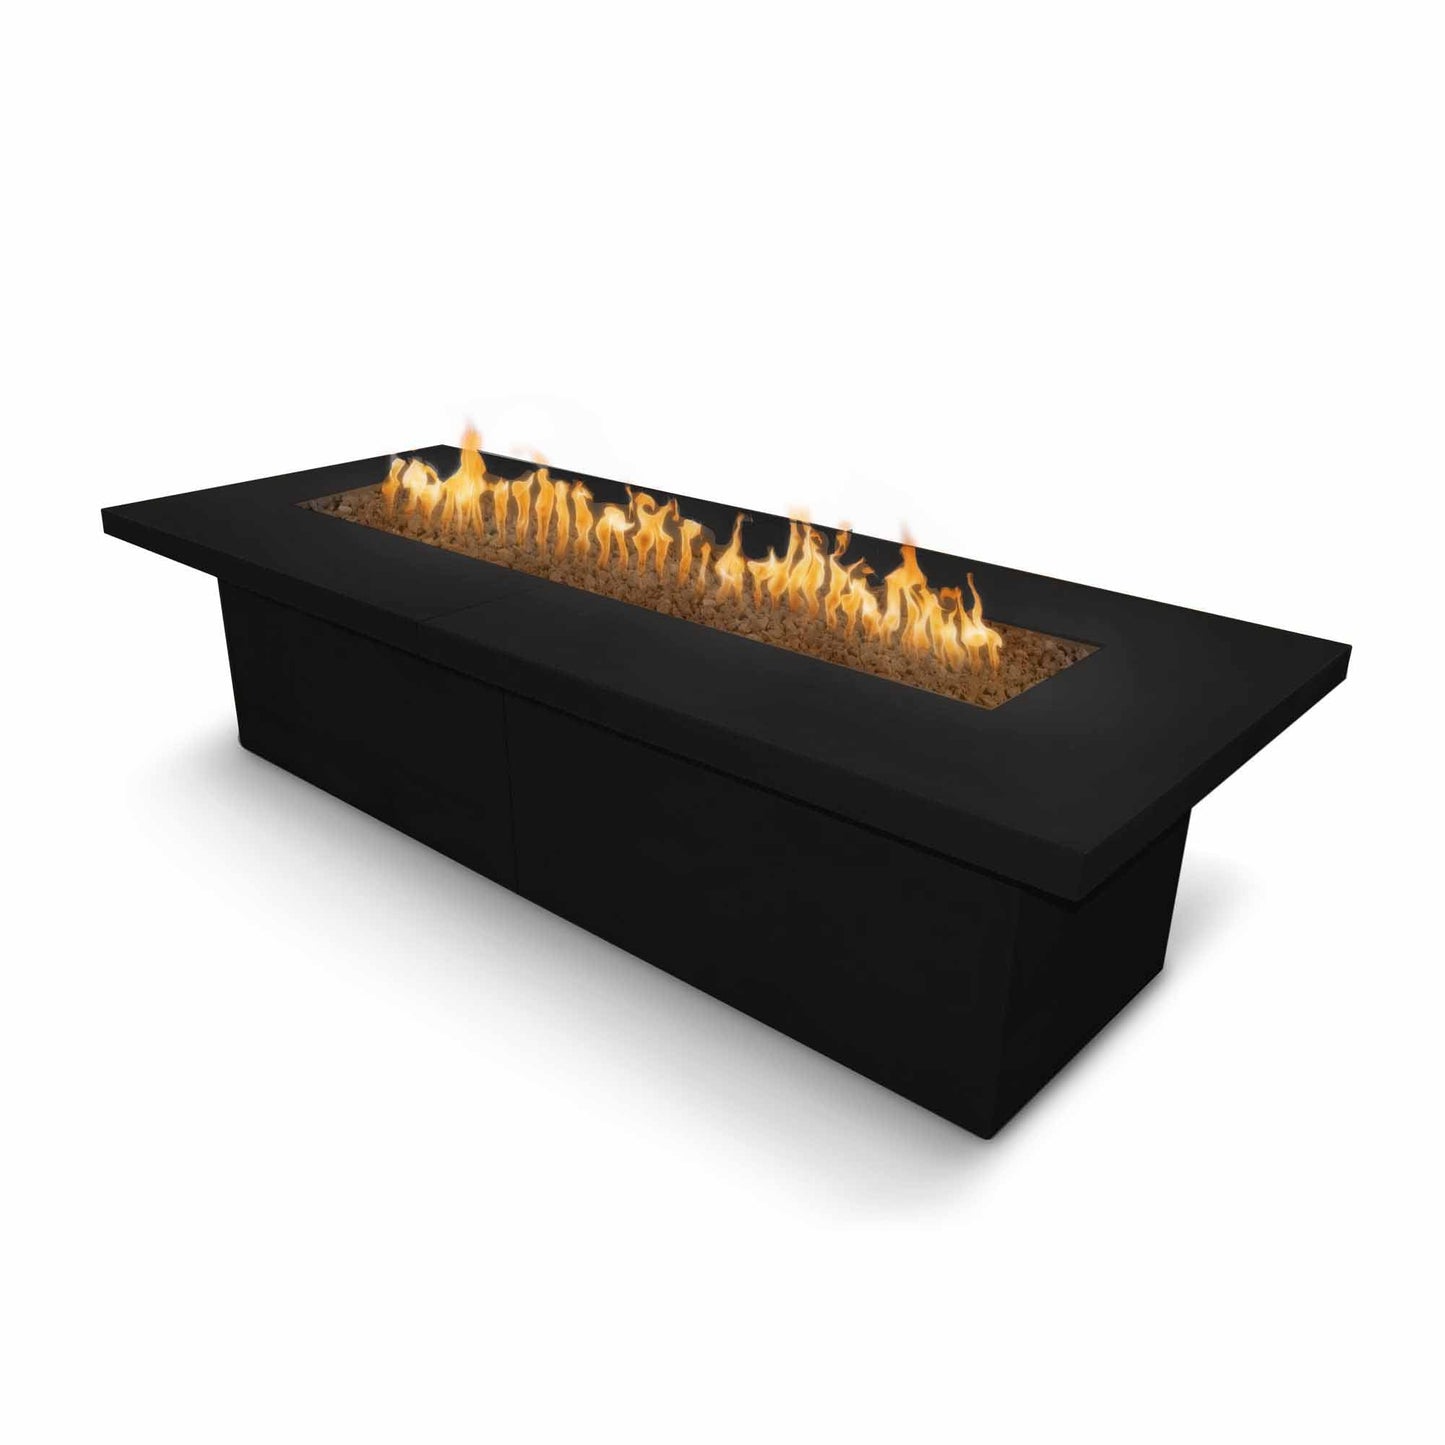 The Outdoor Plus Rectangular Newport 72" Stainless Steel Liquid Propane Fire Pit with Match Lit with Flame Sense Ignition